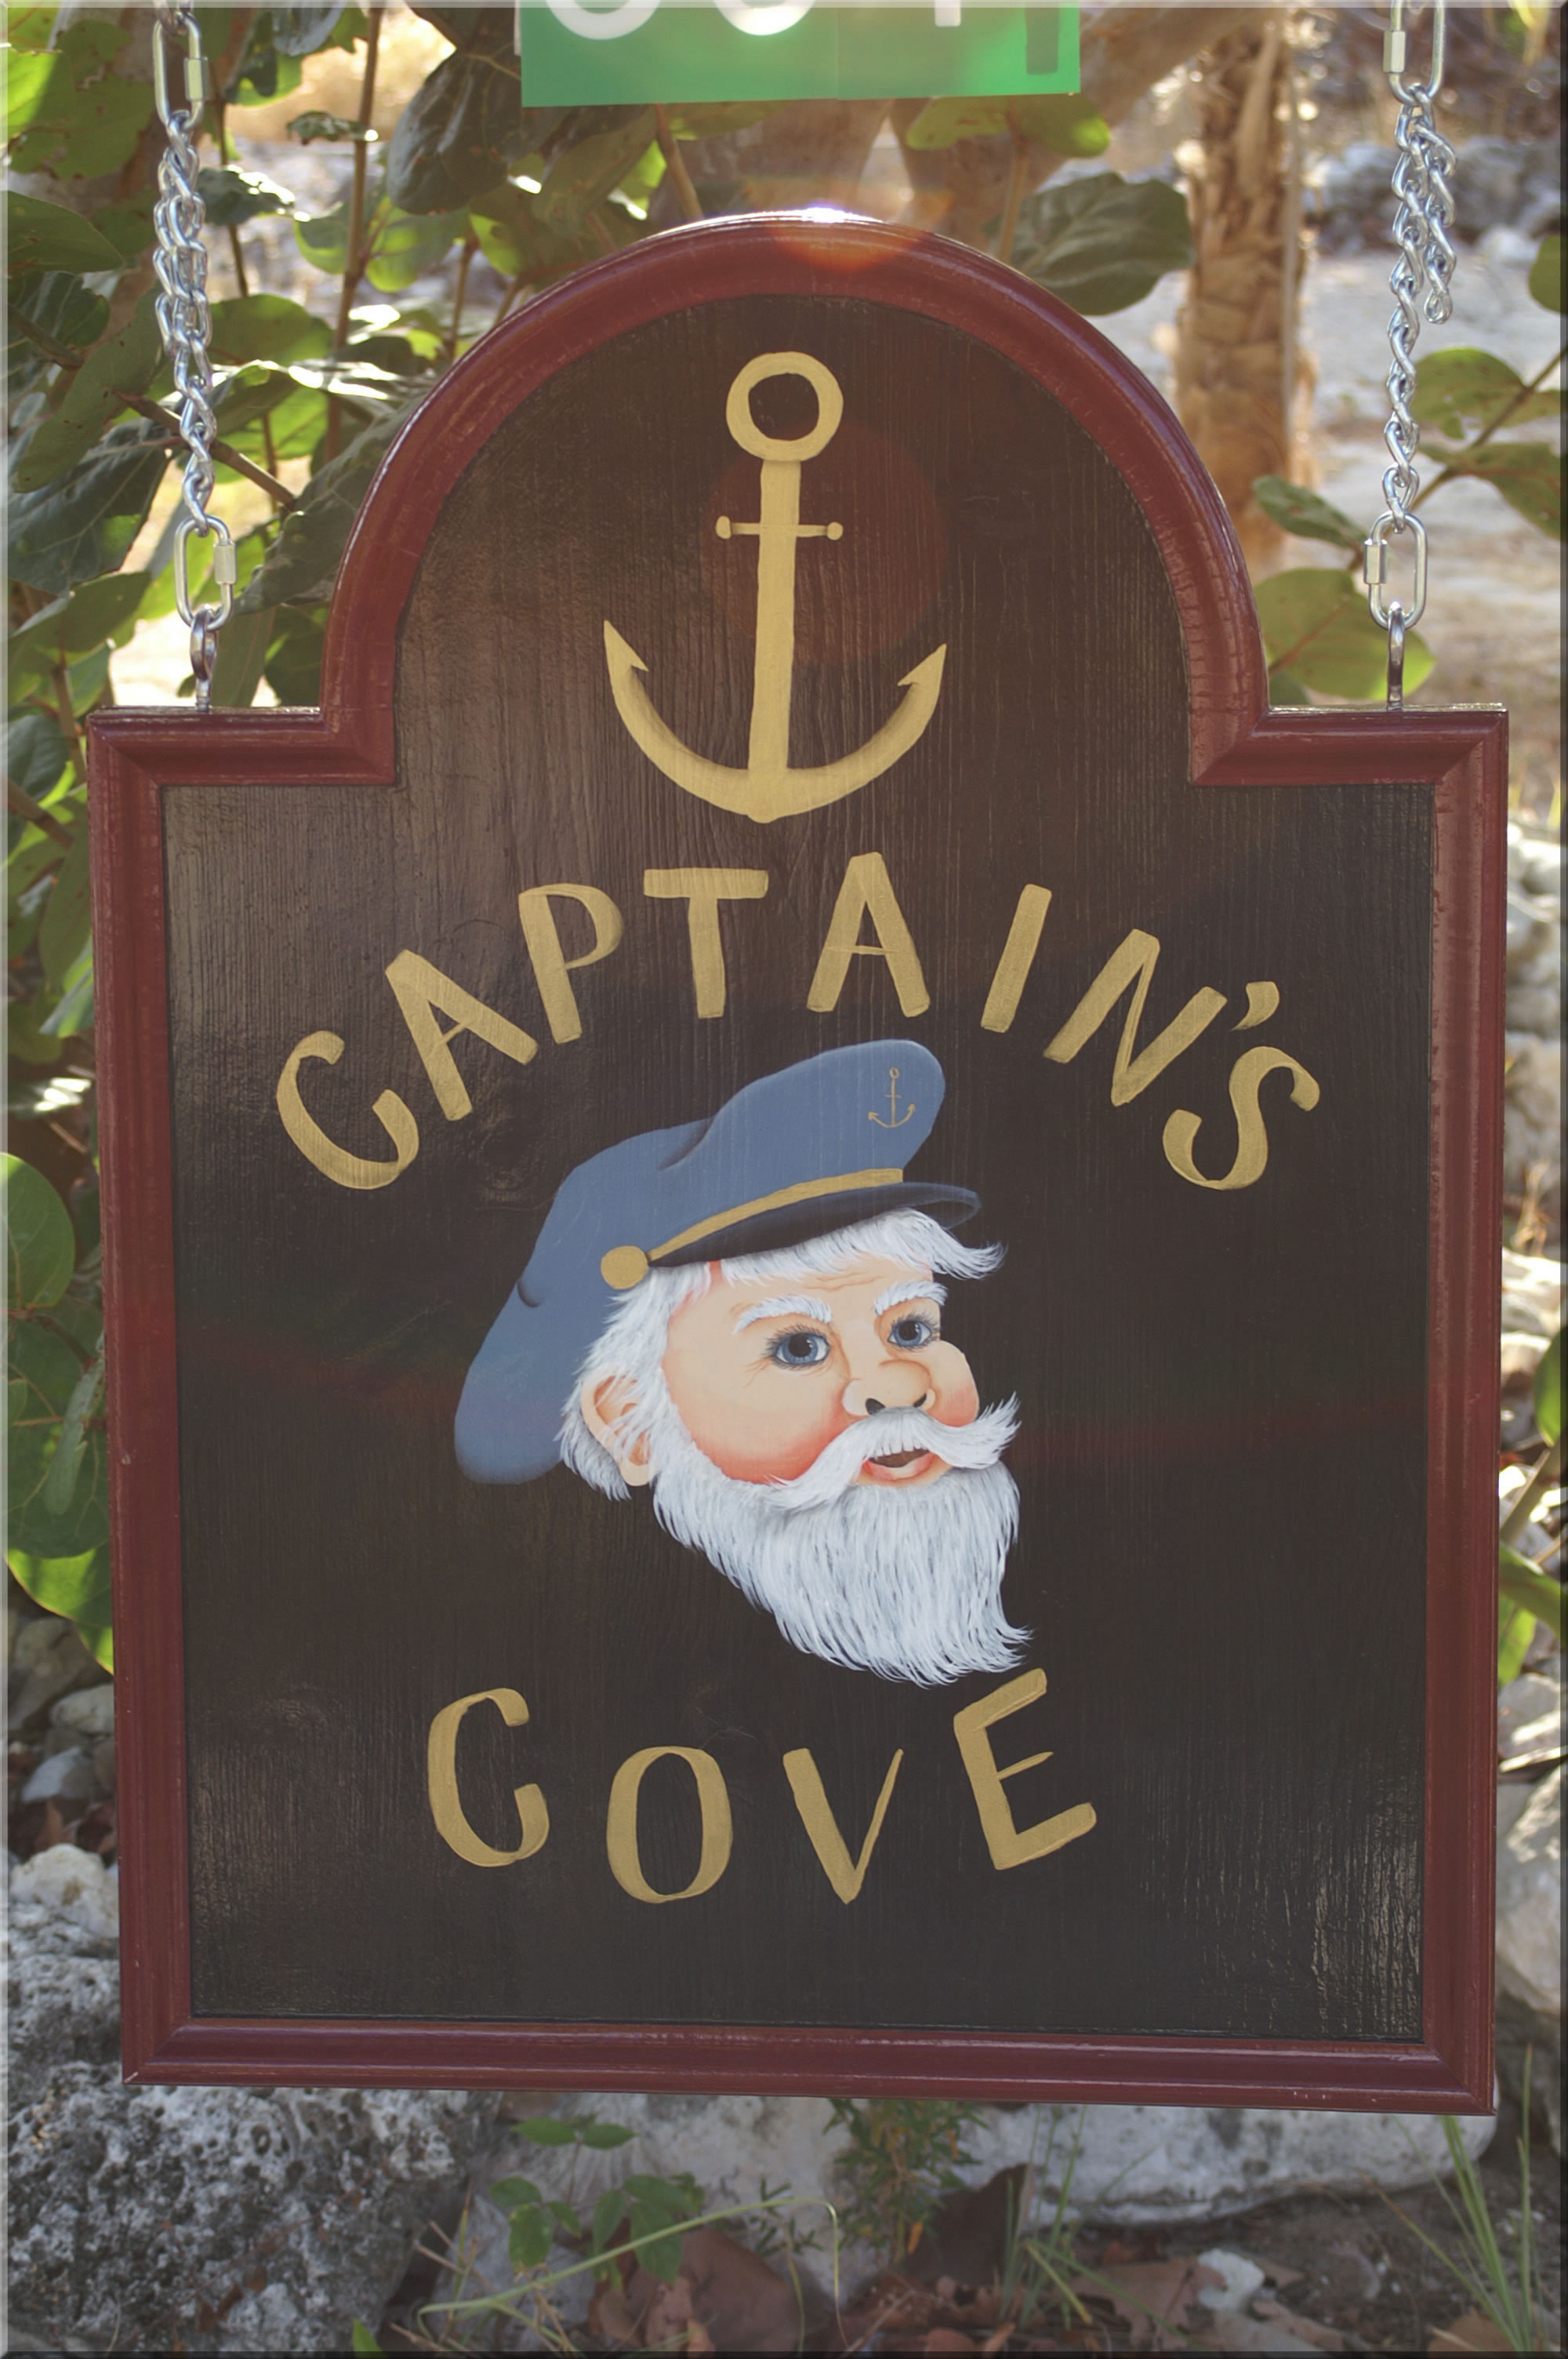 Captain's Cove Sign